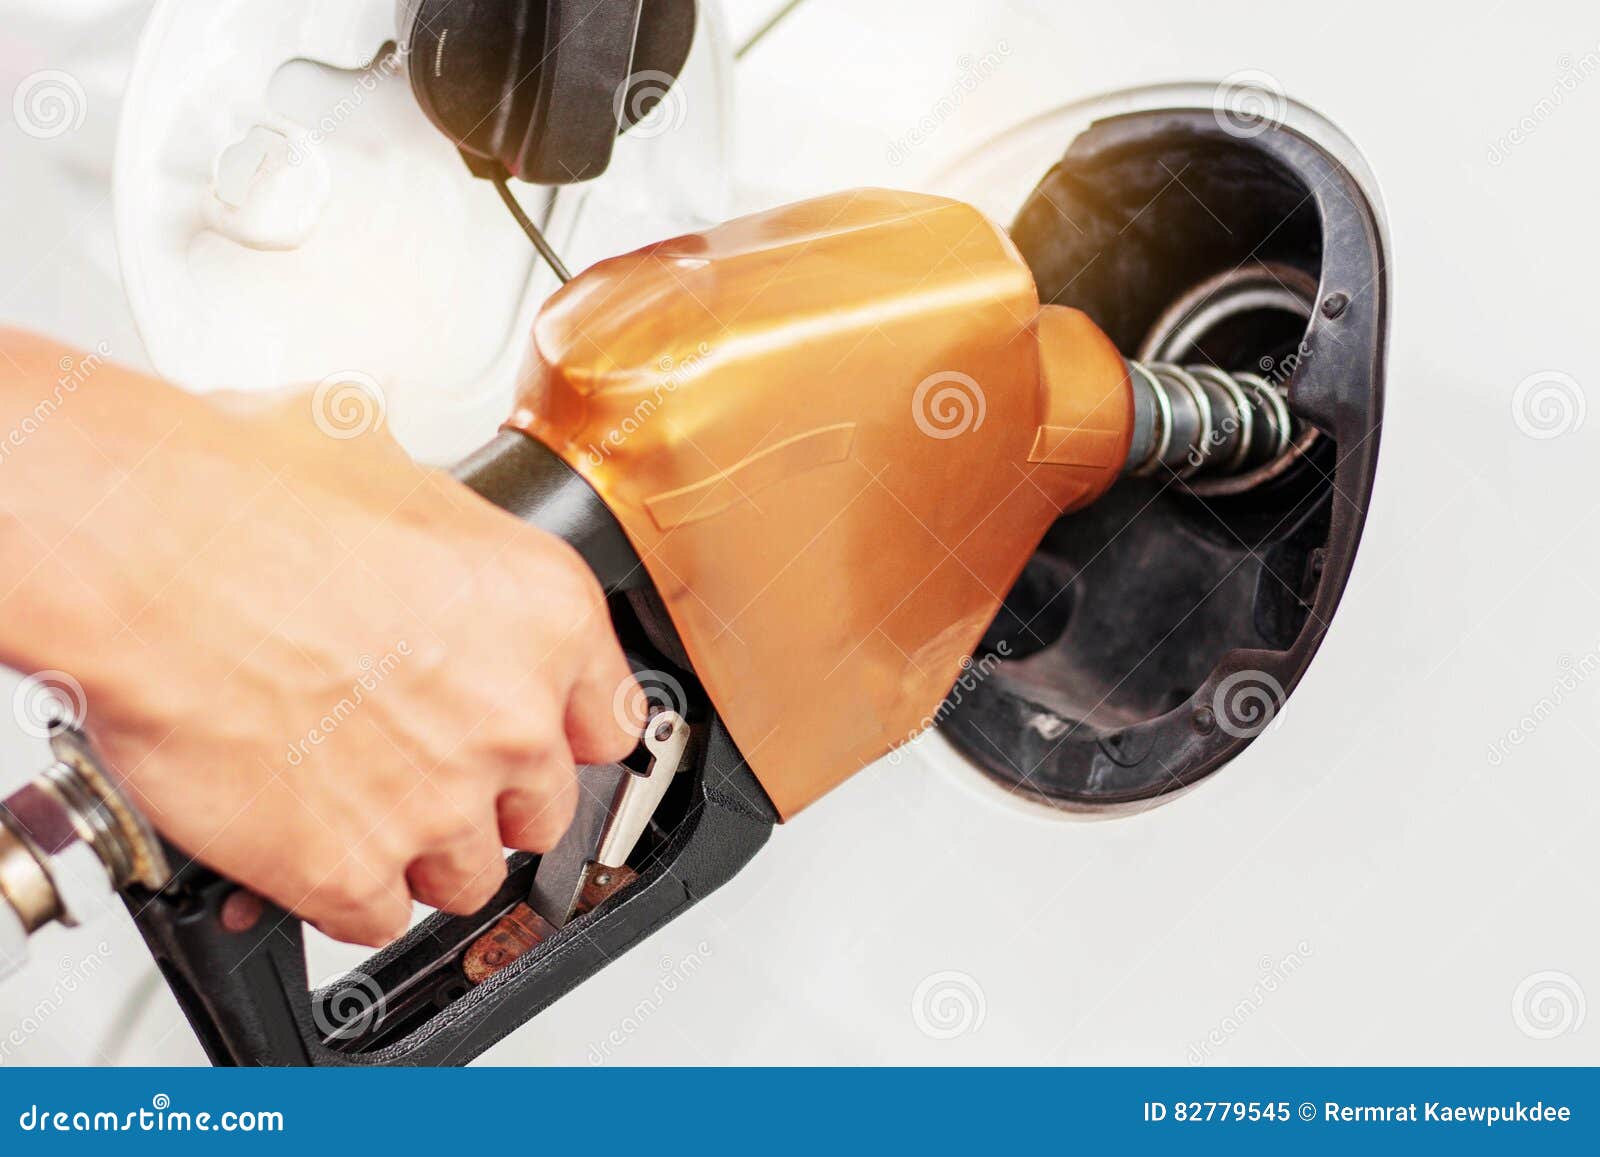 Hands dispensing fuel for cars.